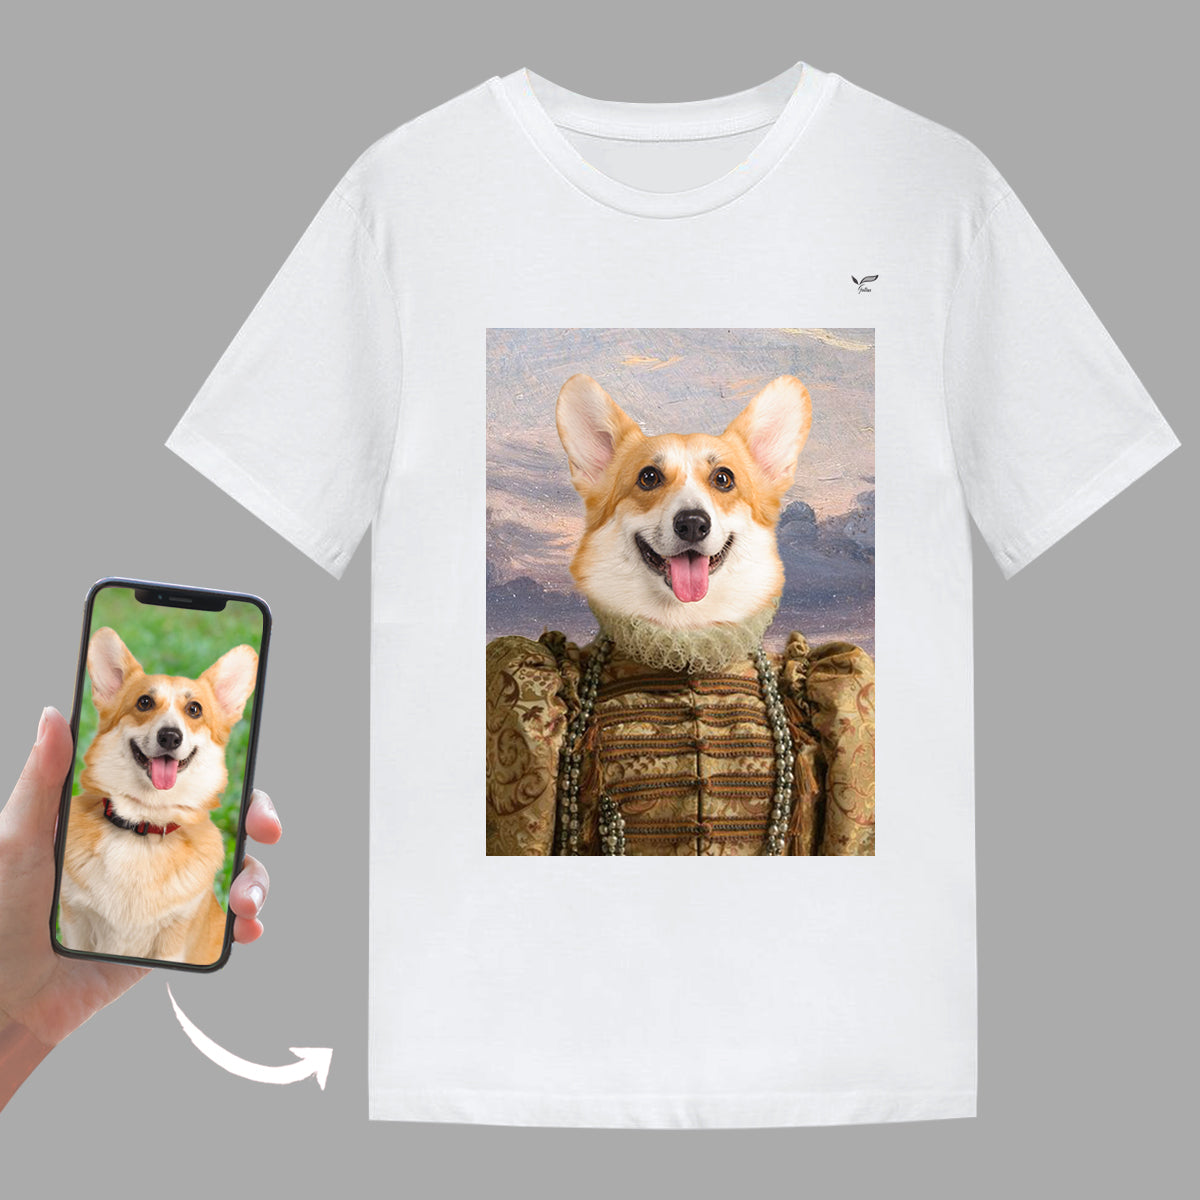 The Beautiful Queen - Personalized T-Shirt With Your Pet's Photo